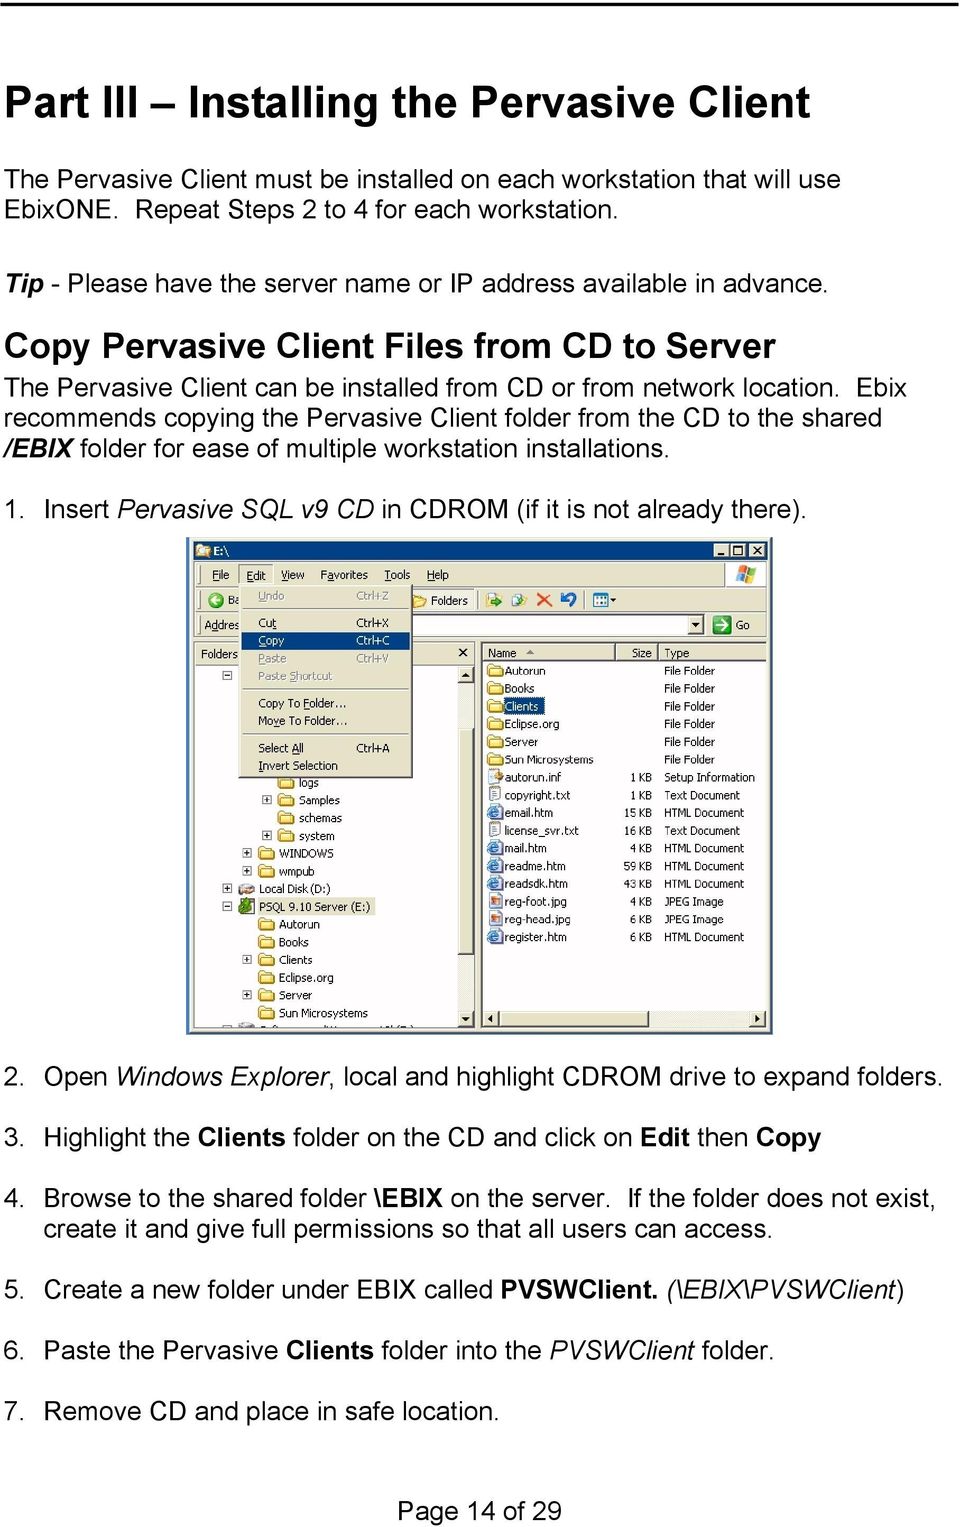 Ebix recommends copying the Pervasive Client folder from the CD to the shared /EBIX folder for ease of multiple workstation installations. 1.